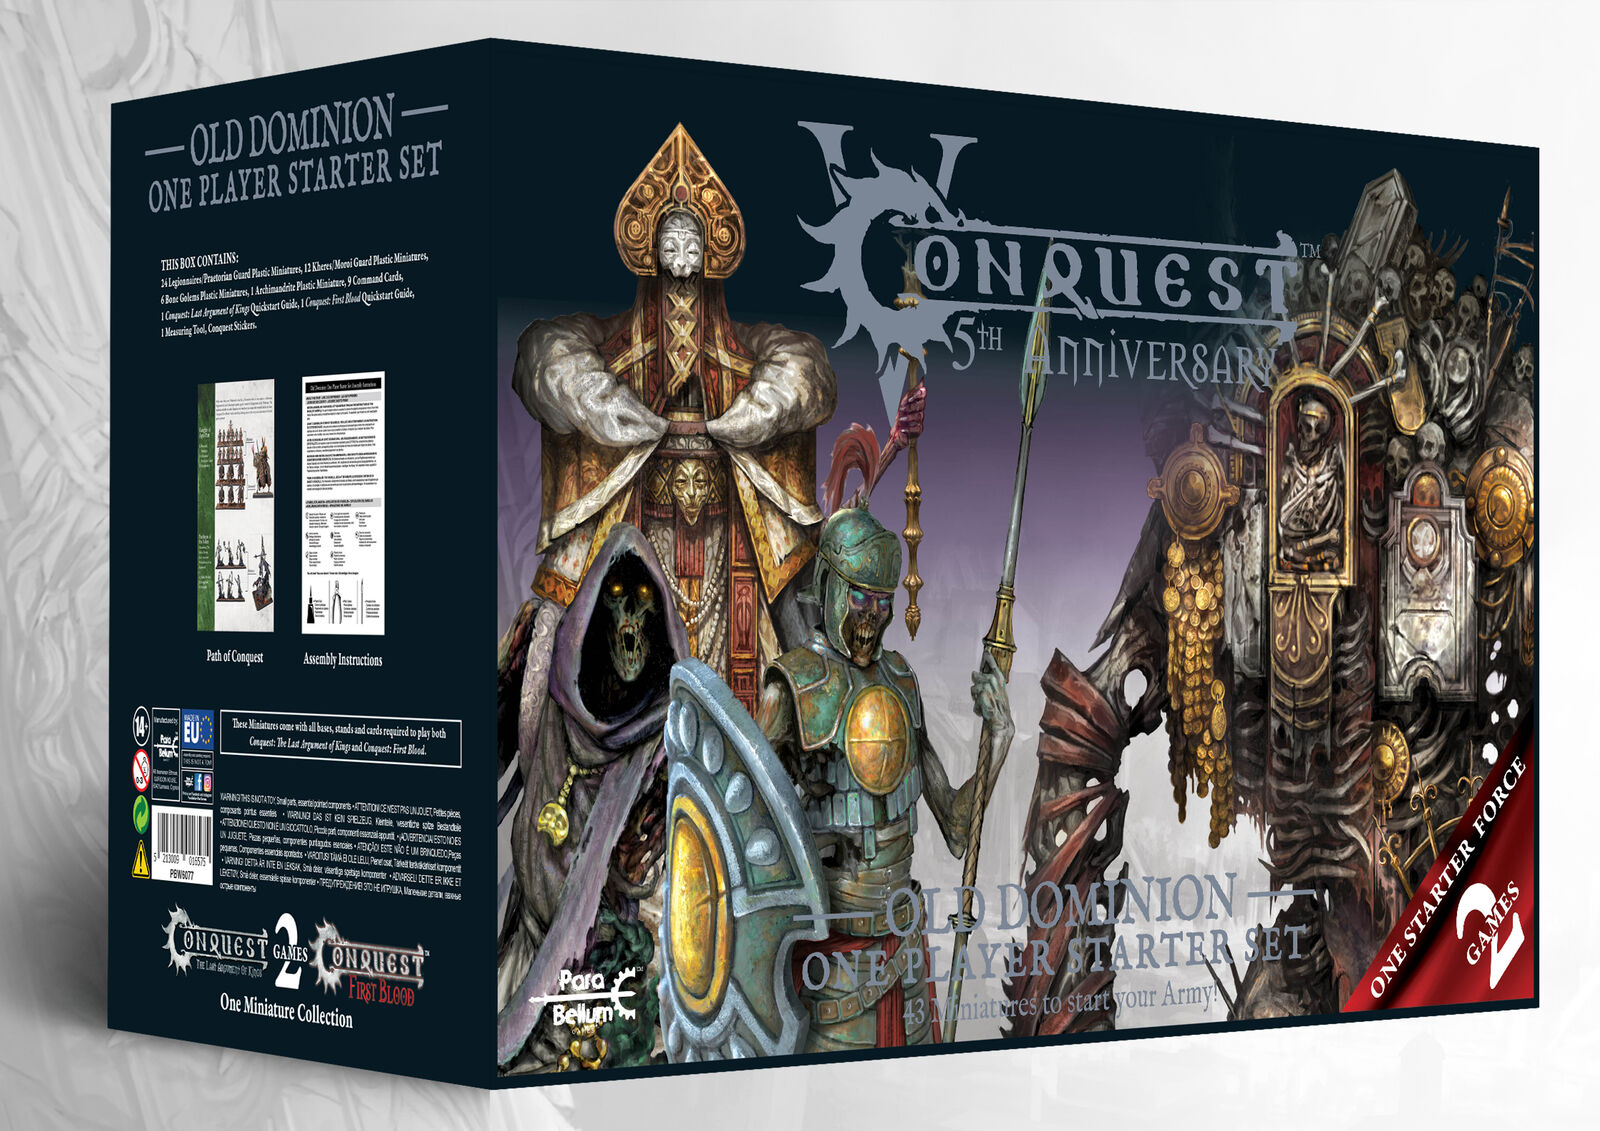 Conquest, Old Dominion - Conquest 5th Anniversary Supercharged Starter Set